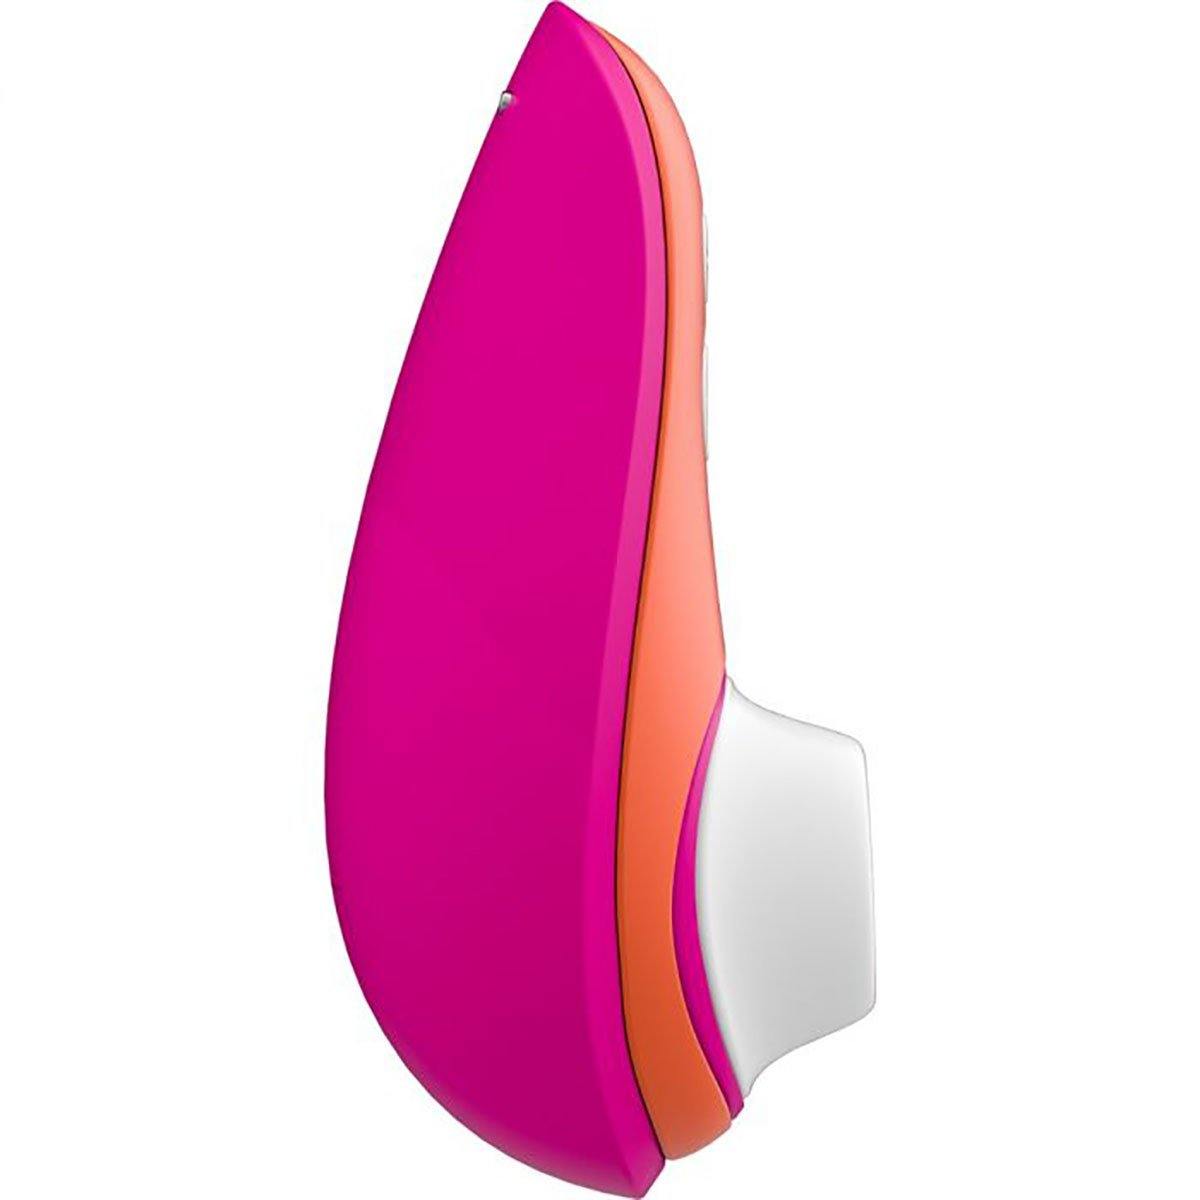 Womanizer Liberty Lily Allen - Buy At Luxury Toy X - Free 3-Day Shipping